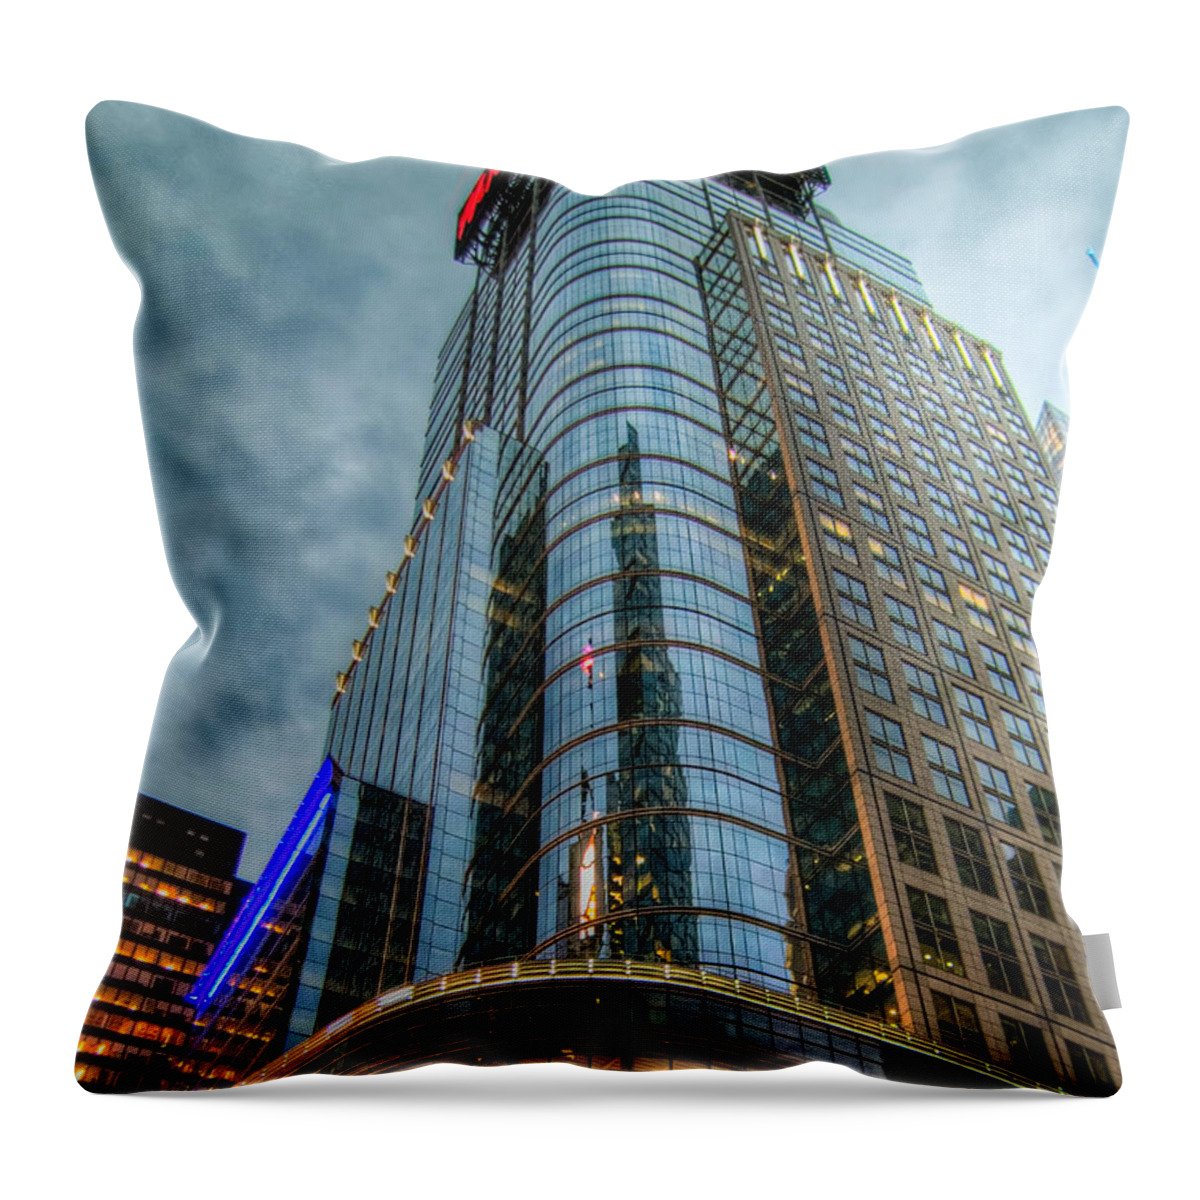 Hdr Throw Pillow featuring the photograph Ny Ny by Ross Henton